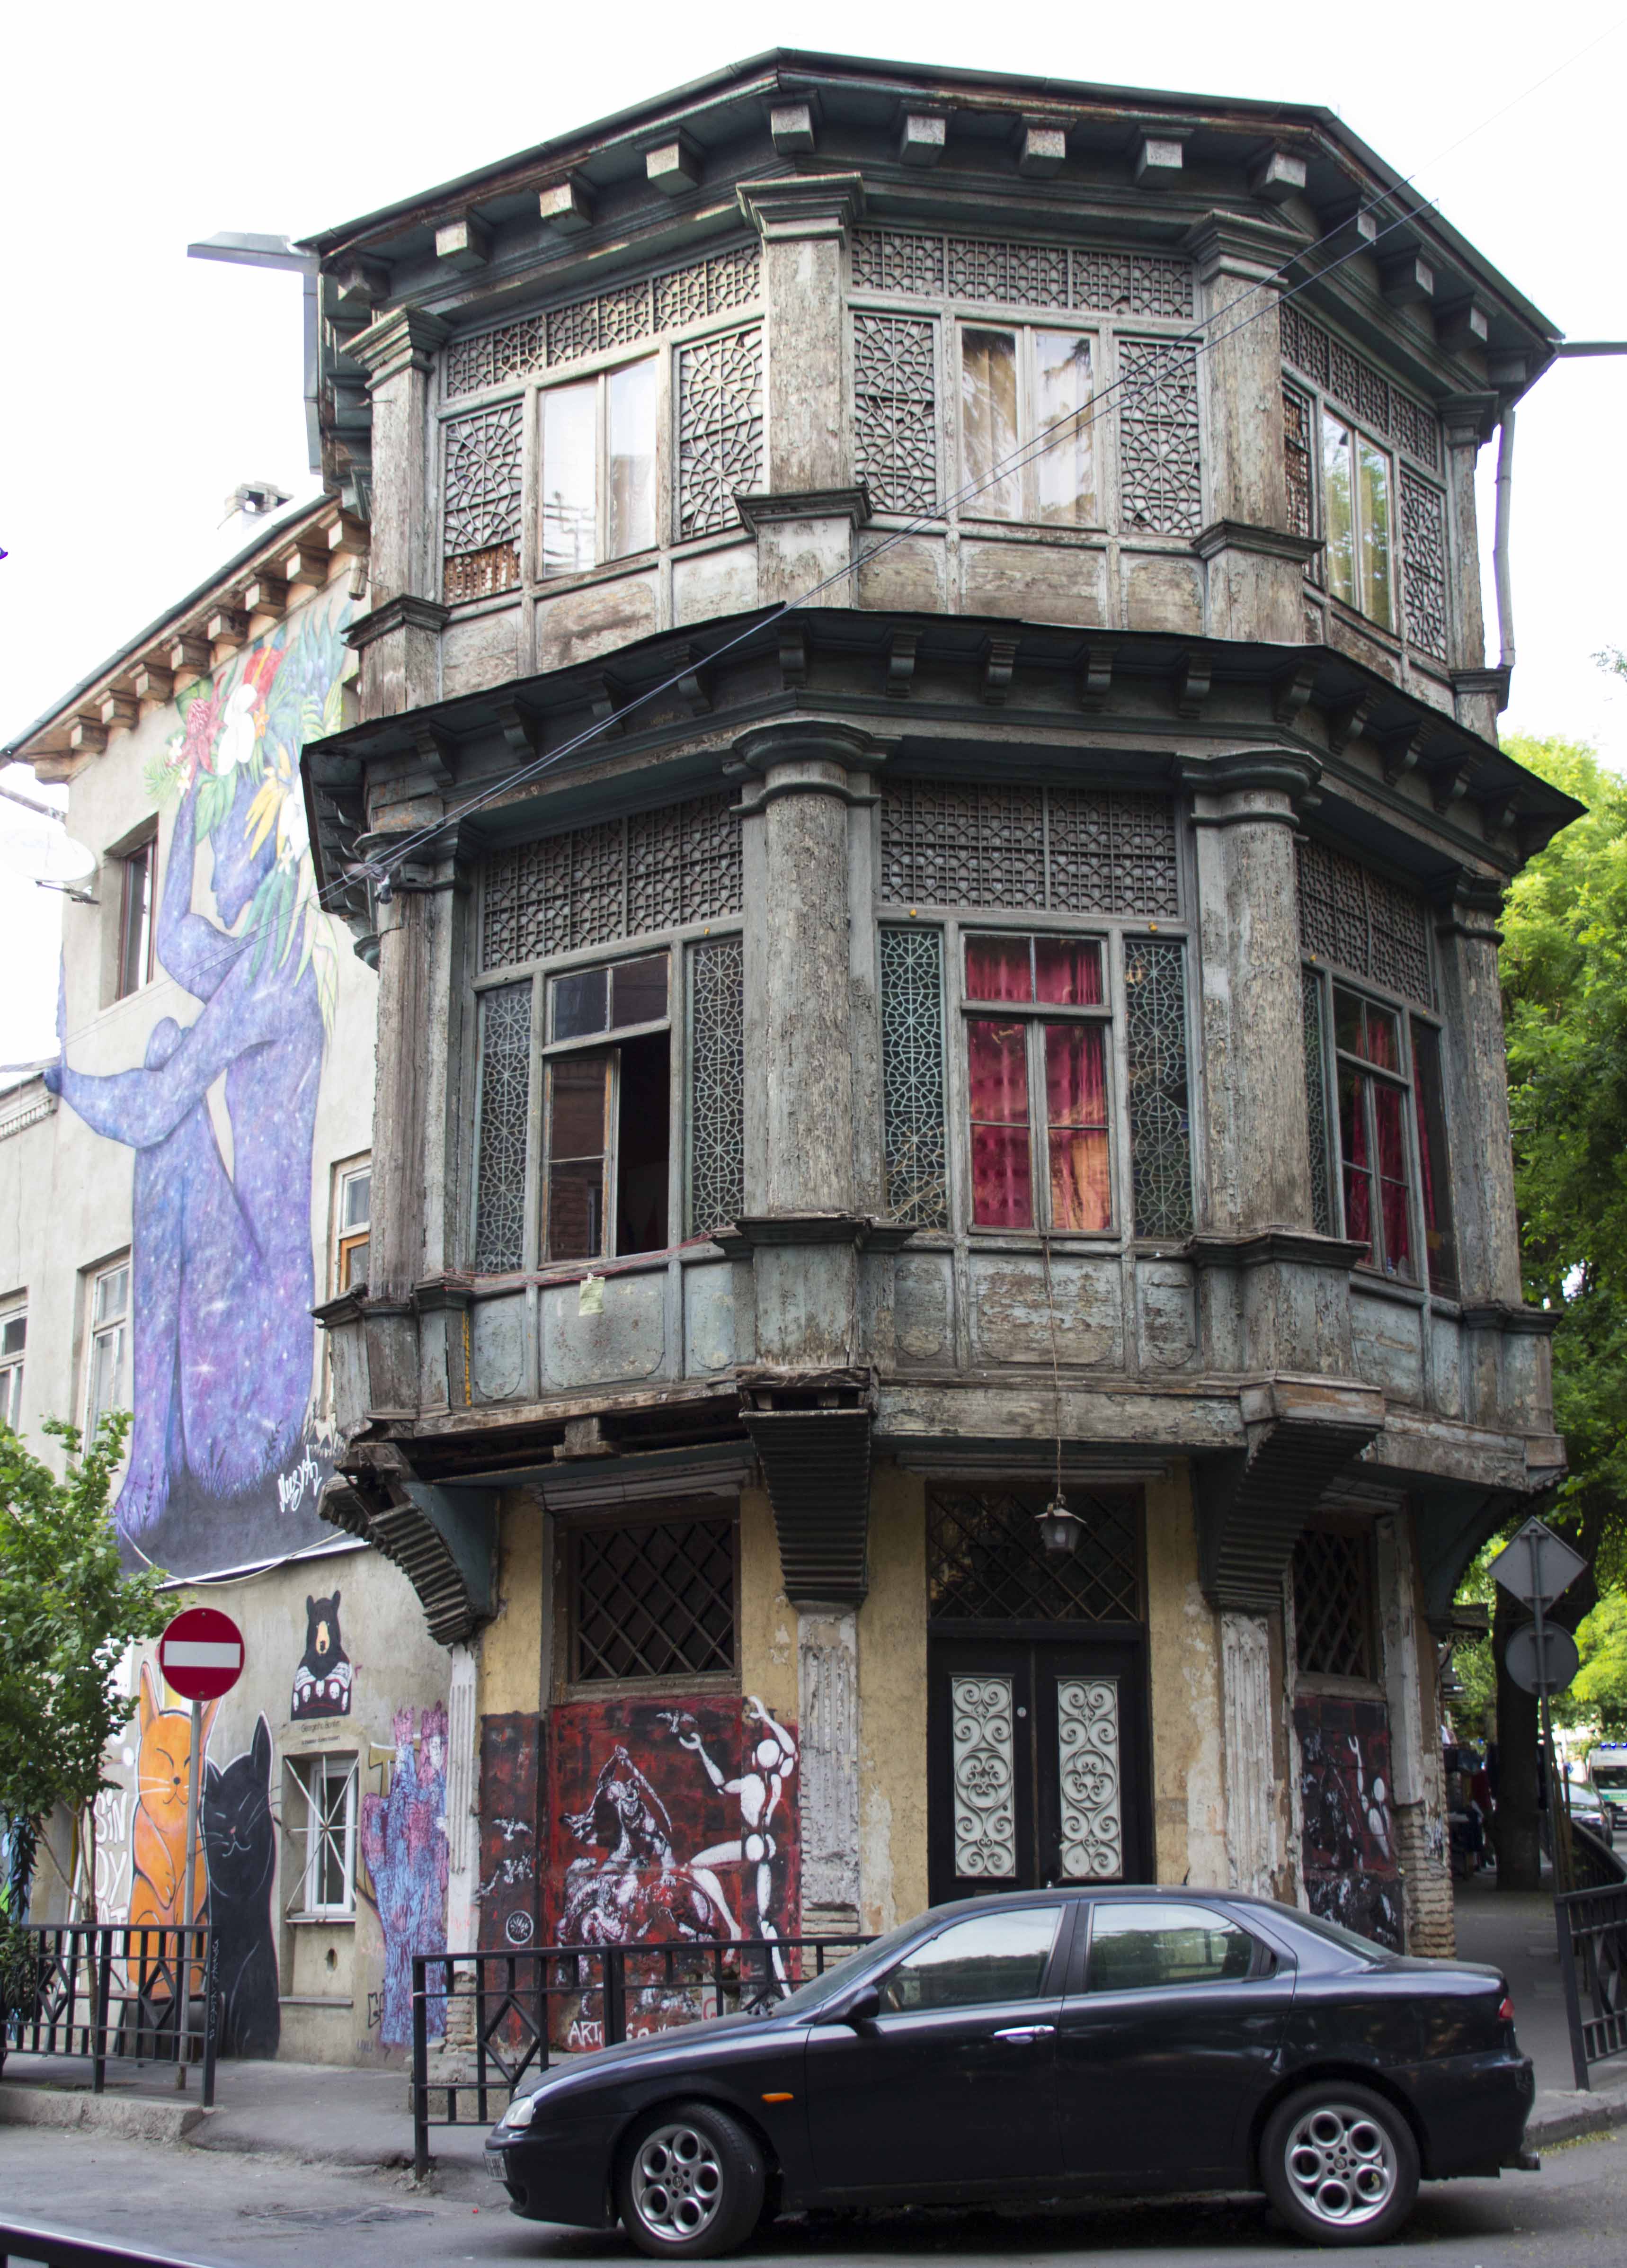 Typical Tbilisi architecture